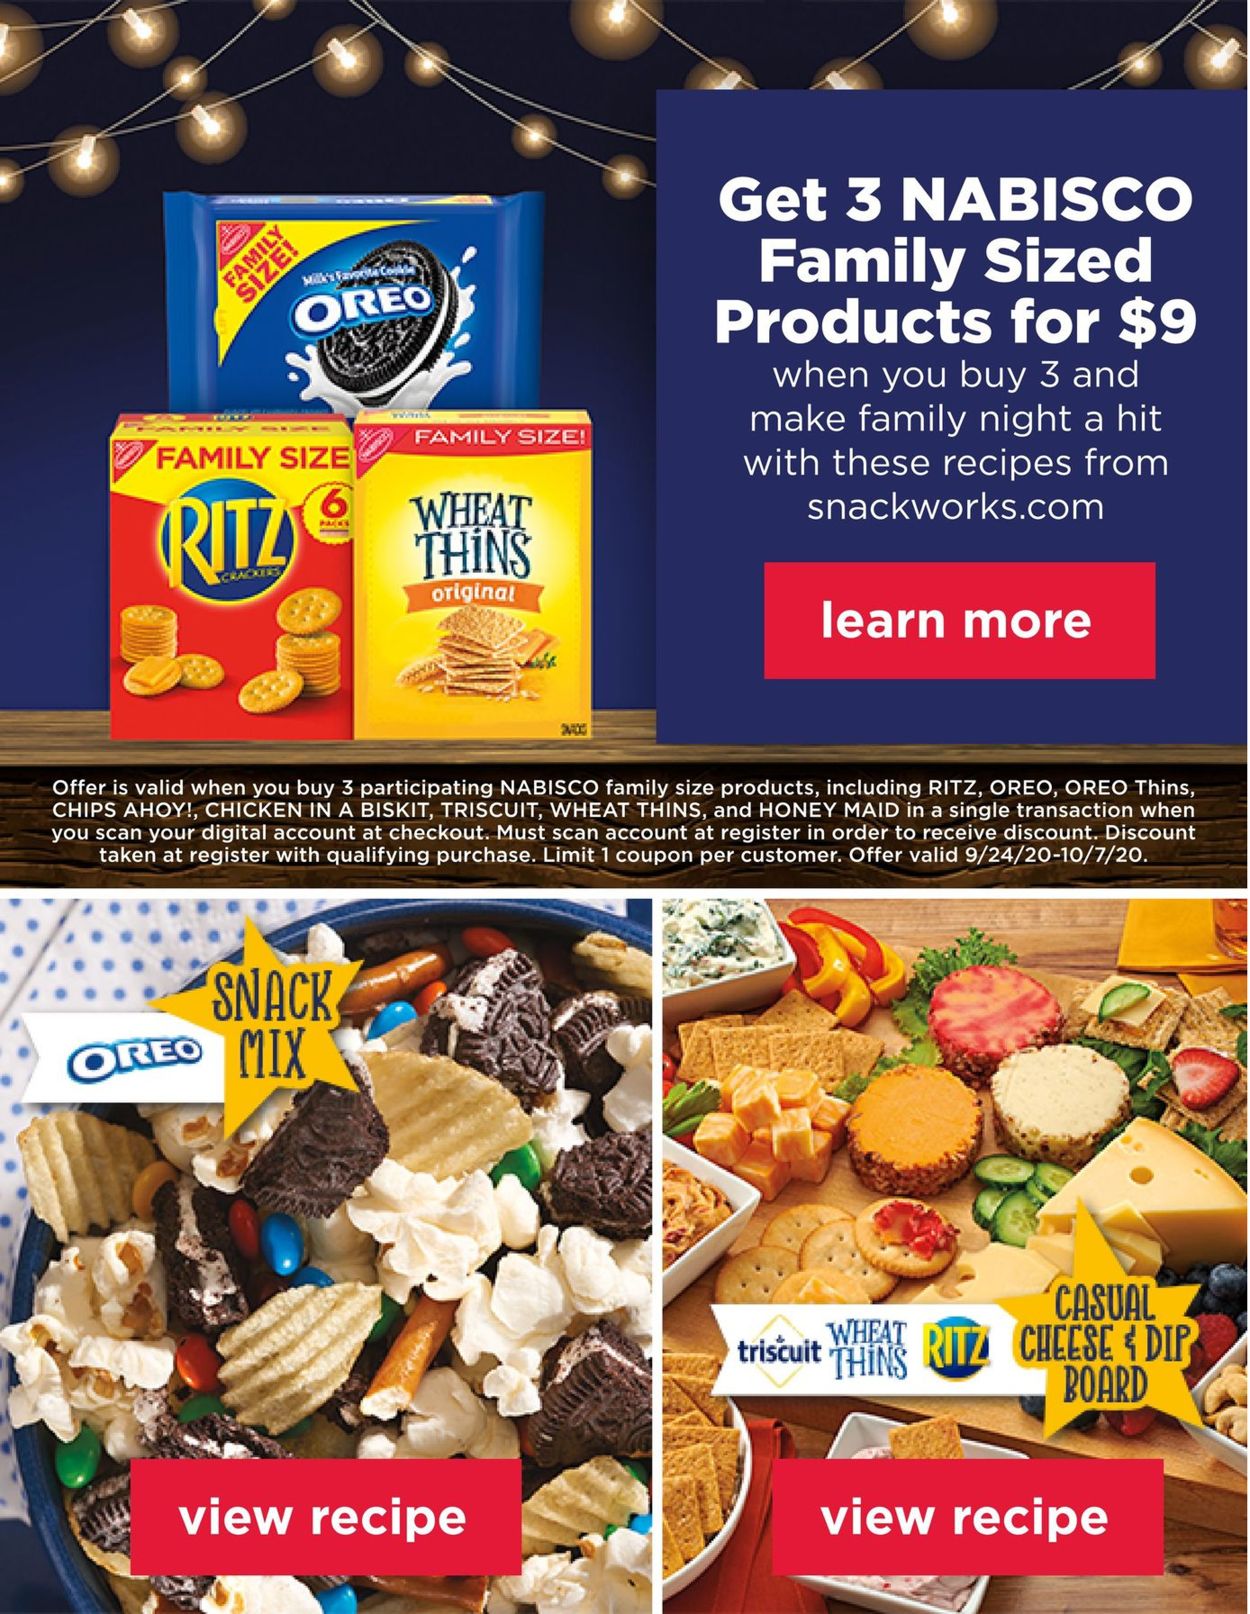 shoppers food weekly ad